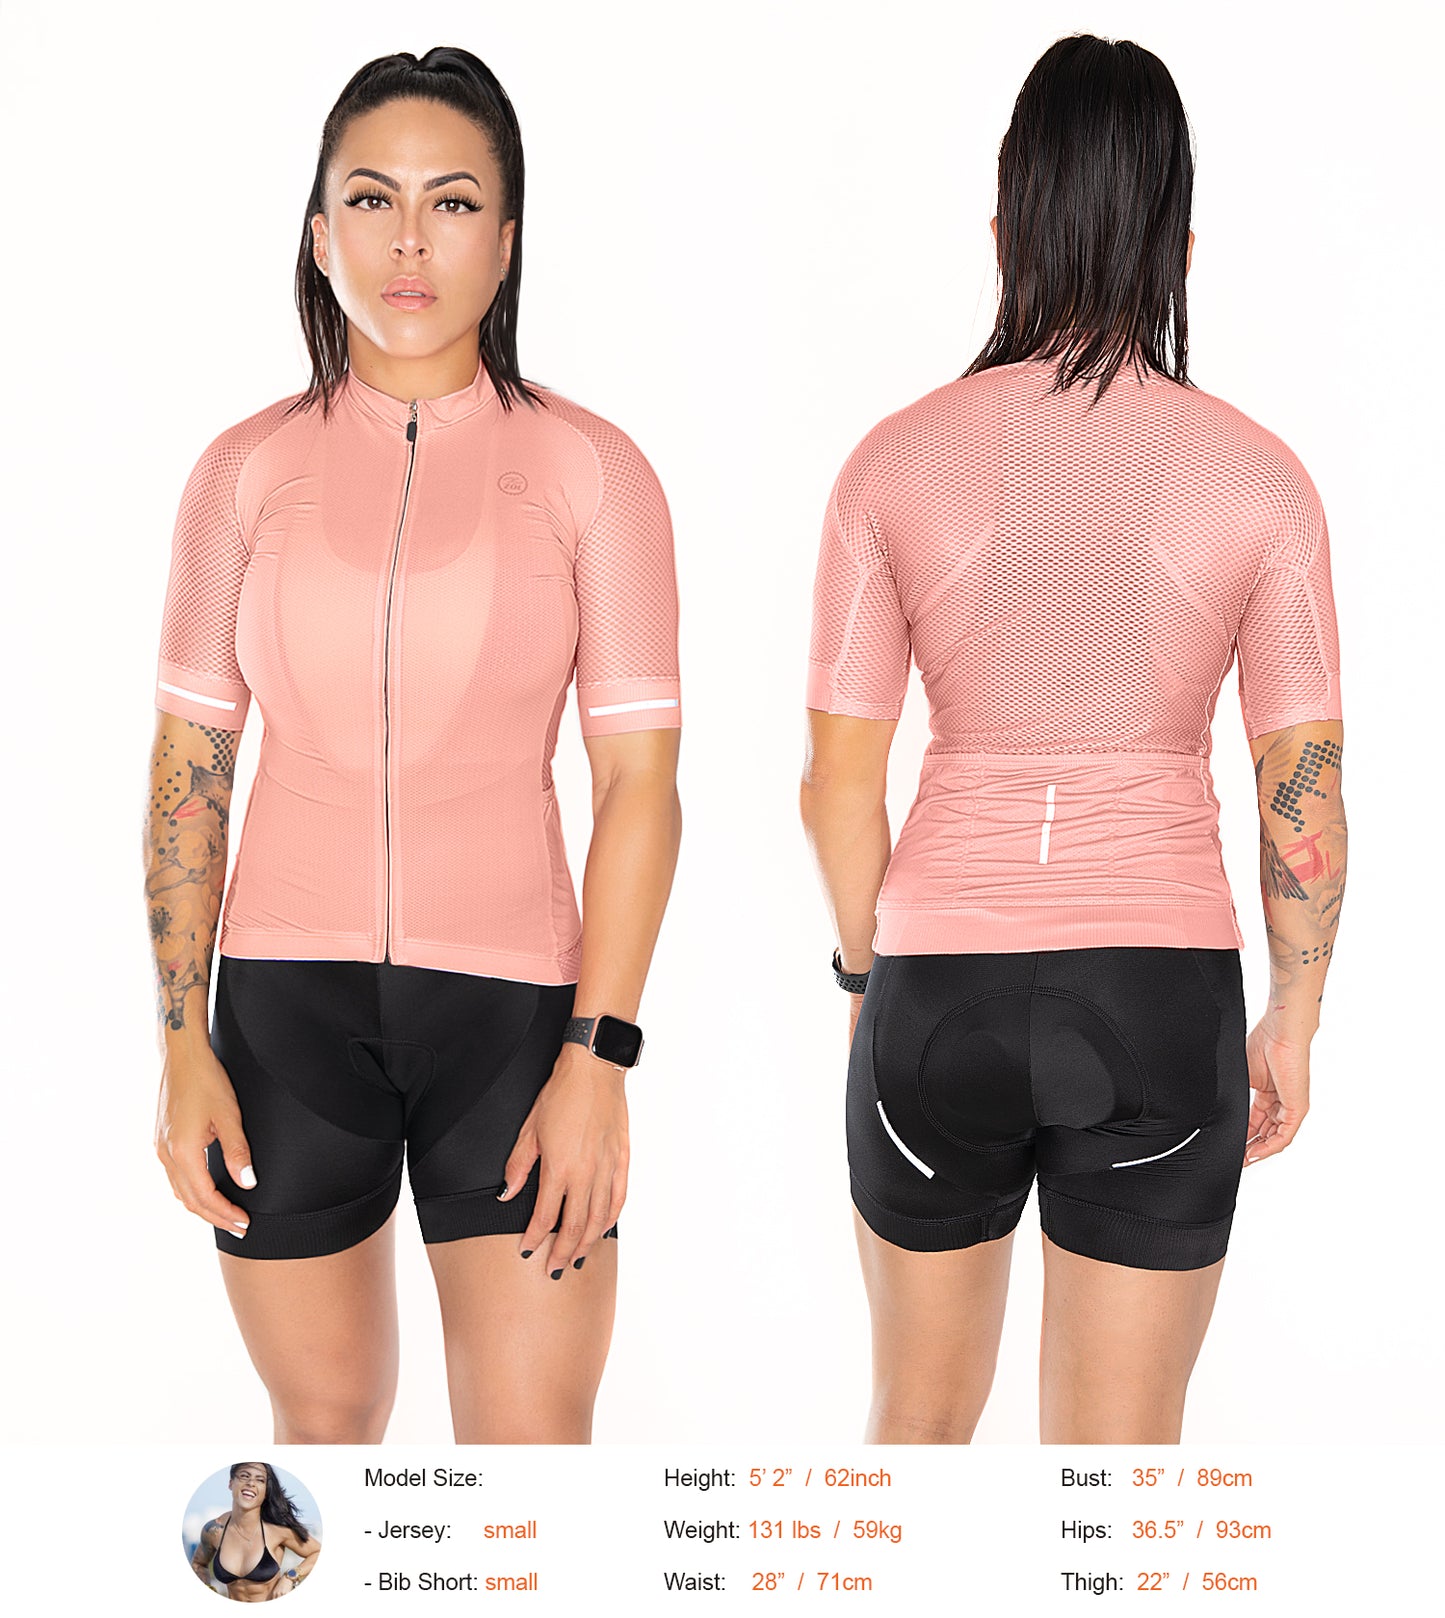 Zol Cycling Breathable Race Fit Jersey (Women)